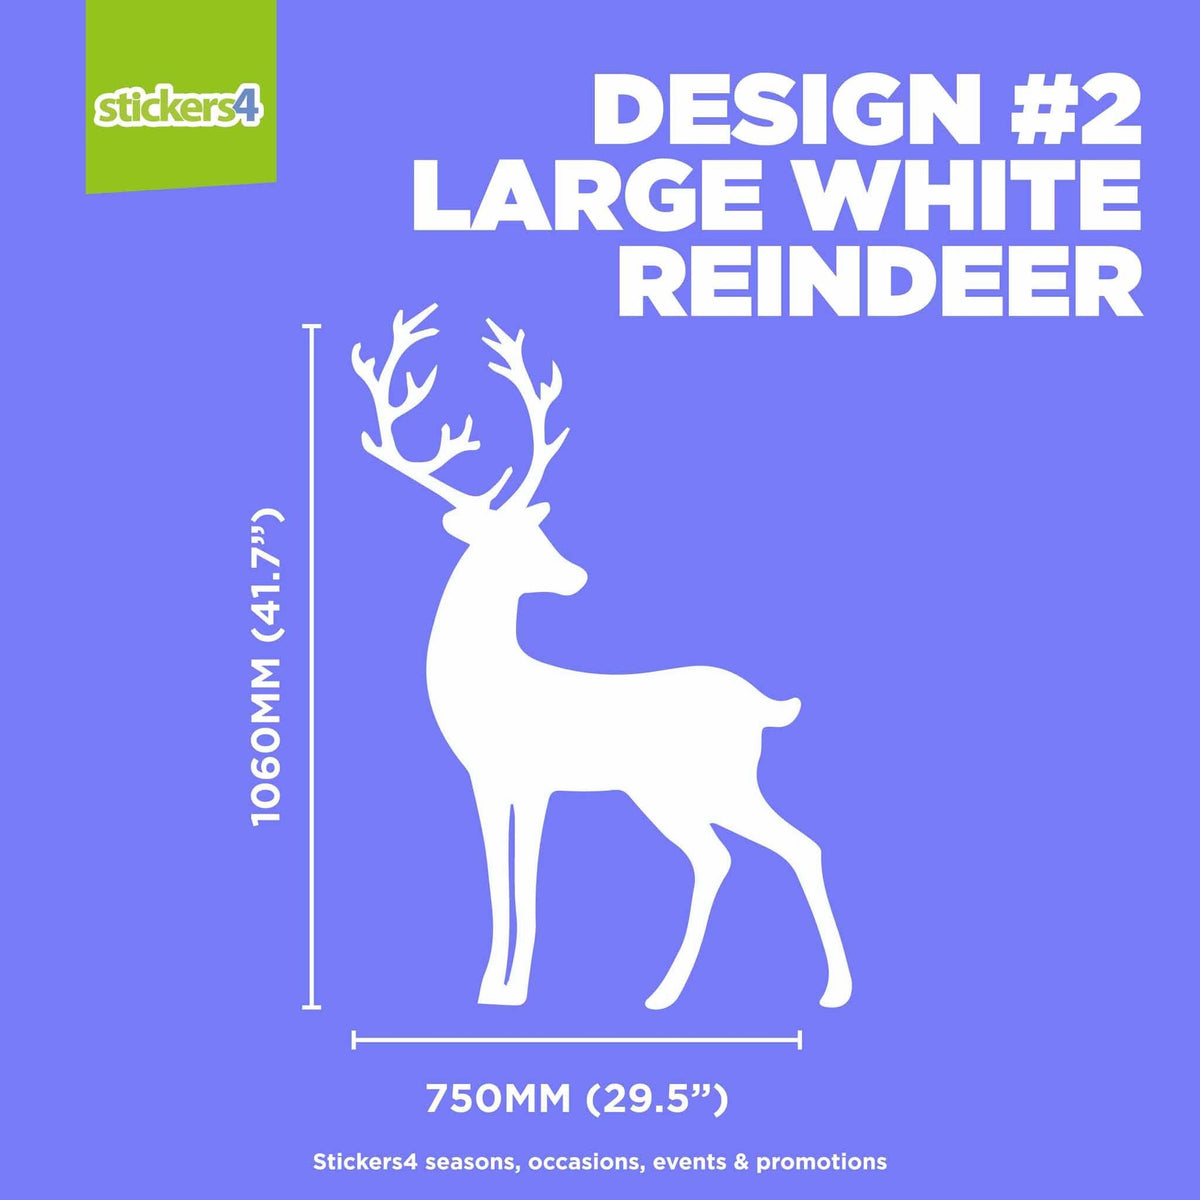 Large White Reindeer Window Cling Sticker